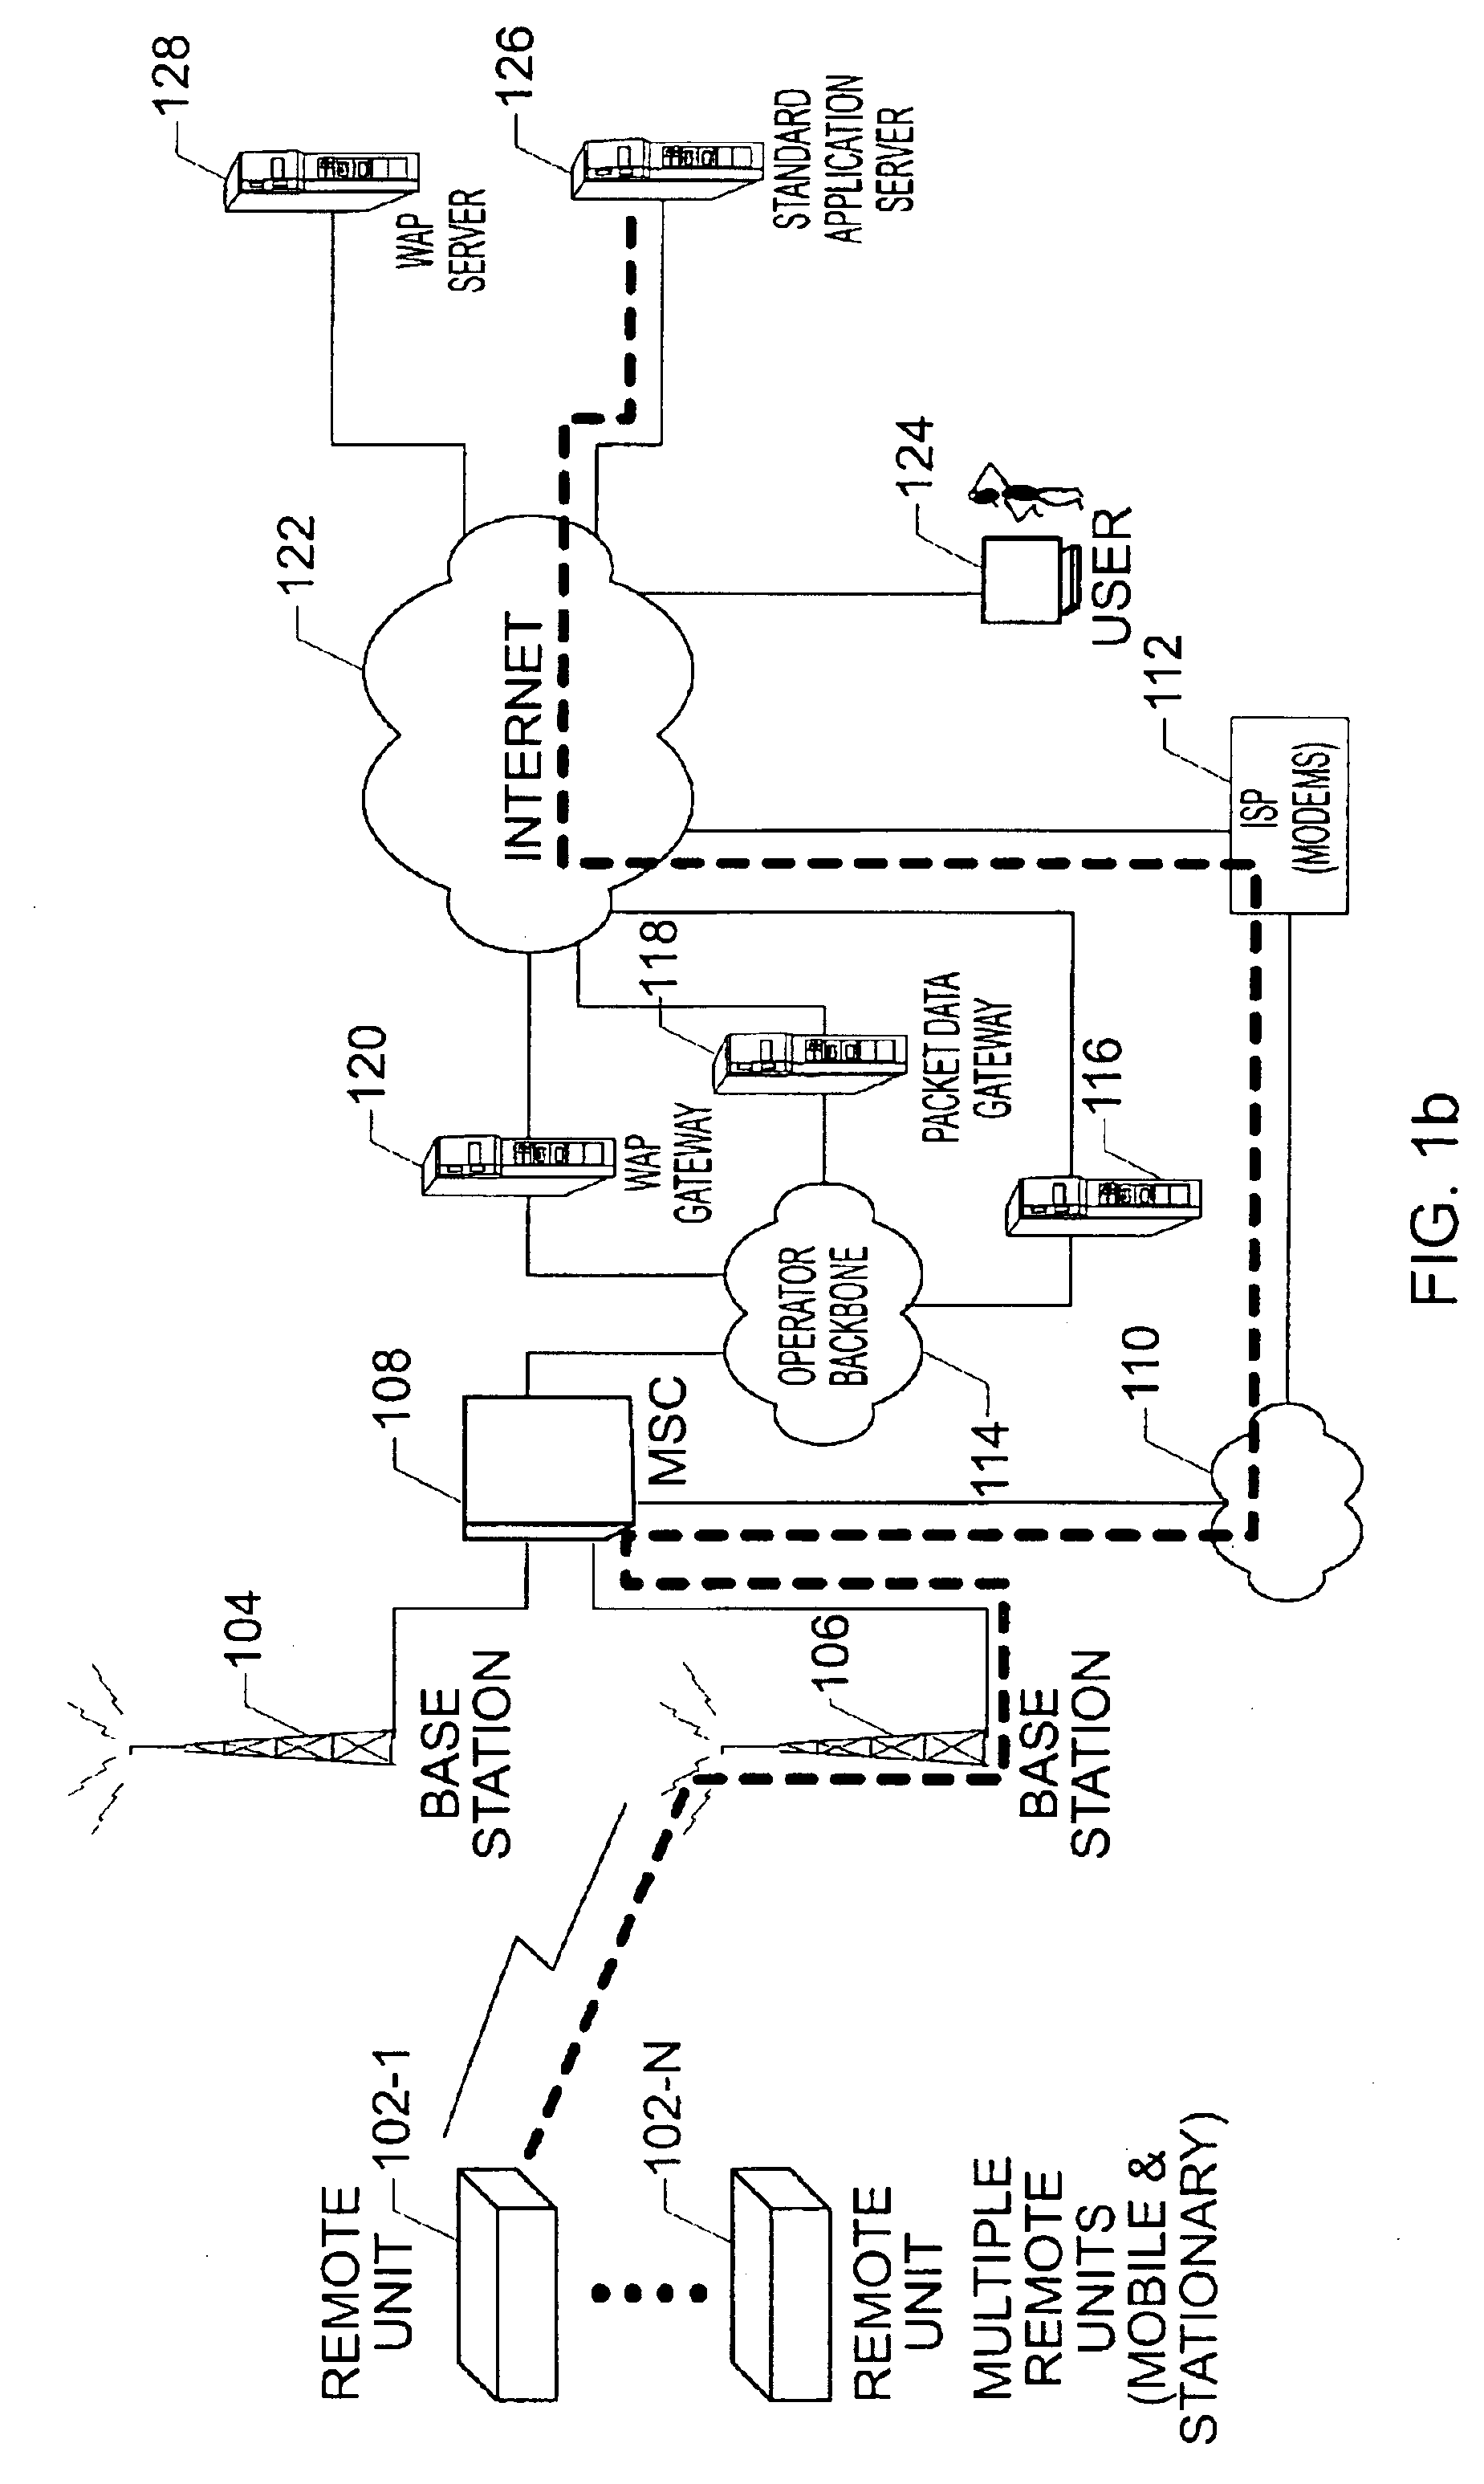 Method and system for measuring data quality of service in a wireless network using multiple remote units and a back end processor